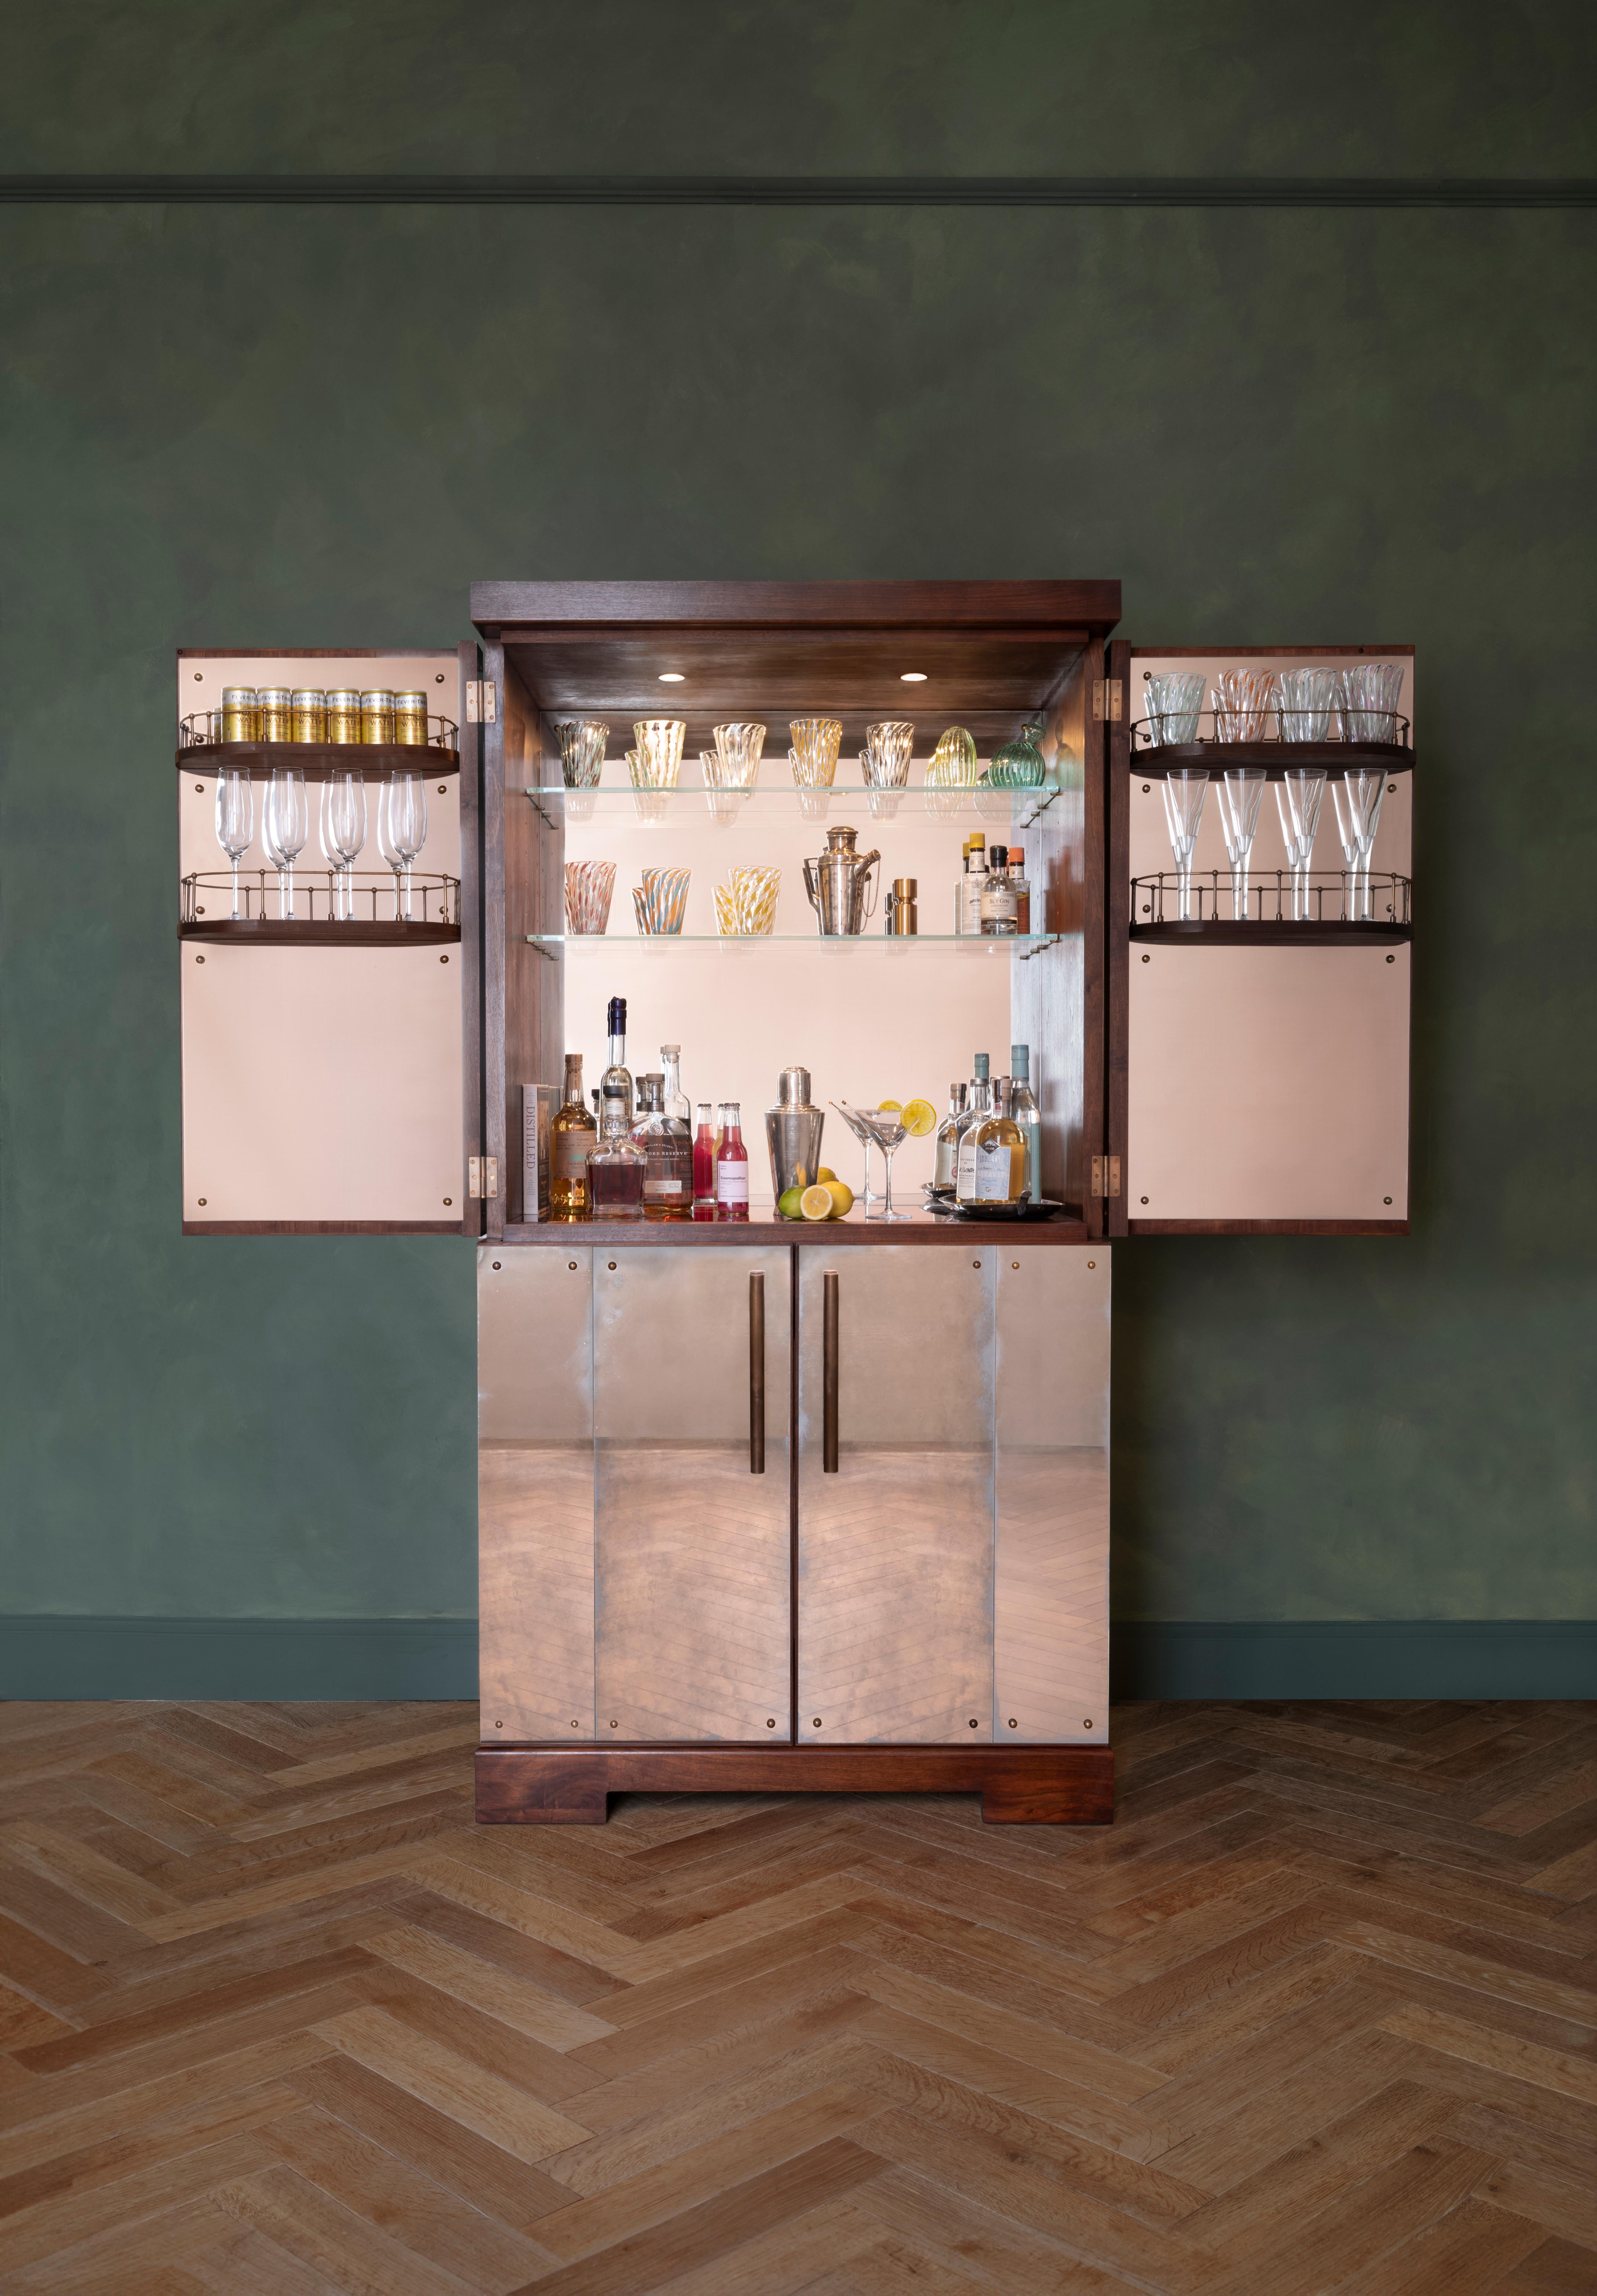 Our classic Art-Deco inspired cocktail cabinet is made with an antiqued mirror exterior and a dark-stained, oiled and waxed walnut interior. Featuring four adjustable shelves, gallery rails, a soft close drawer, fridge and a black glass counter